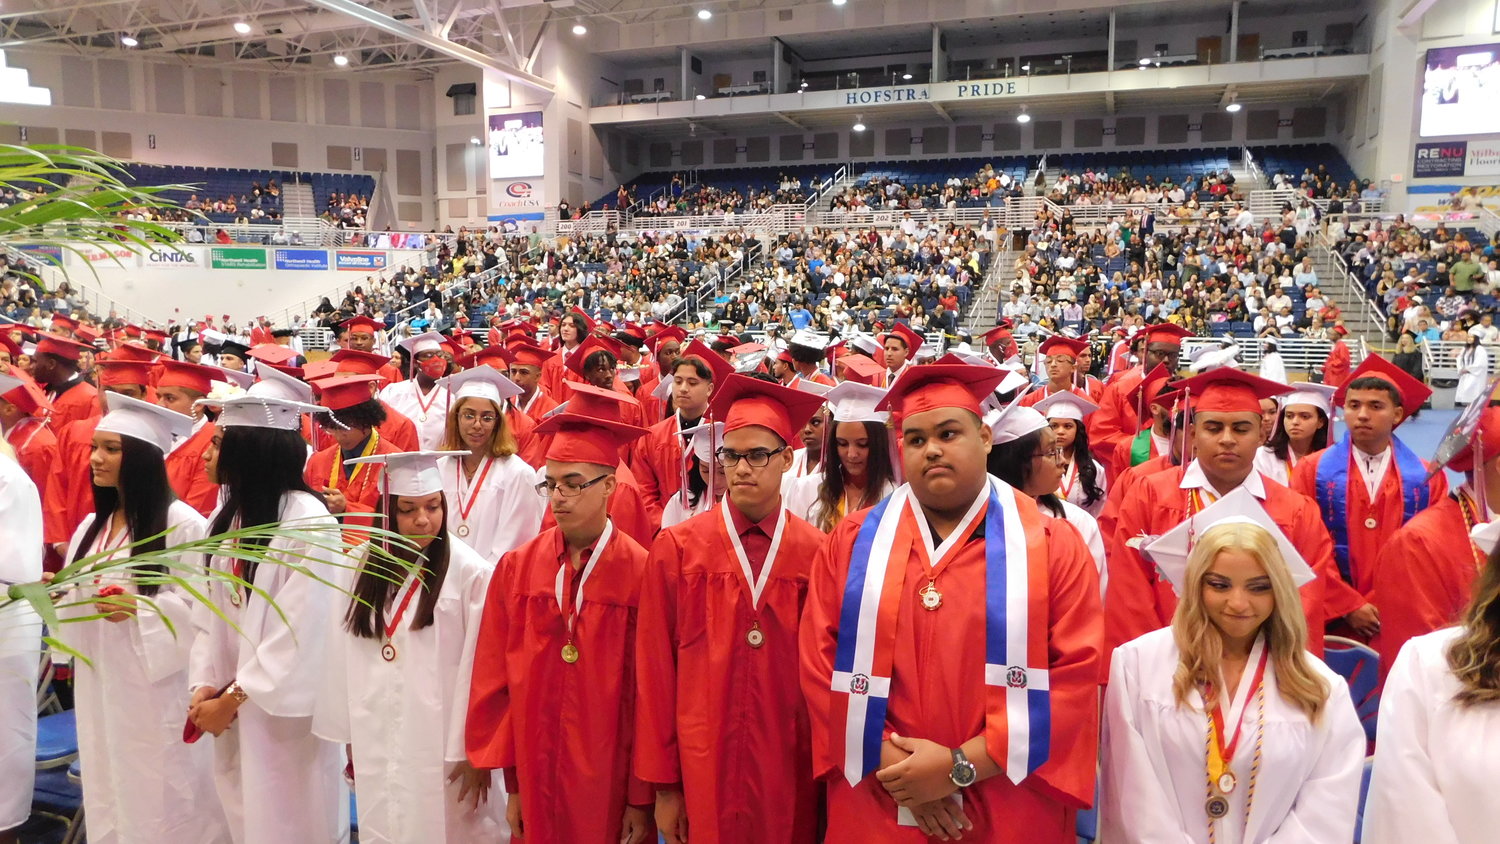 Four hundred fifteen Freeport High School graduates received their diplomas at the ceremony on June 16.